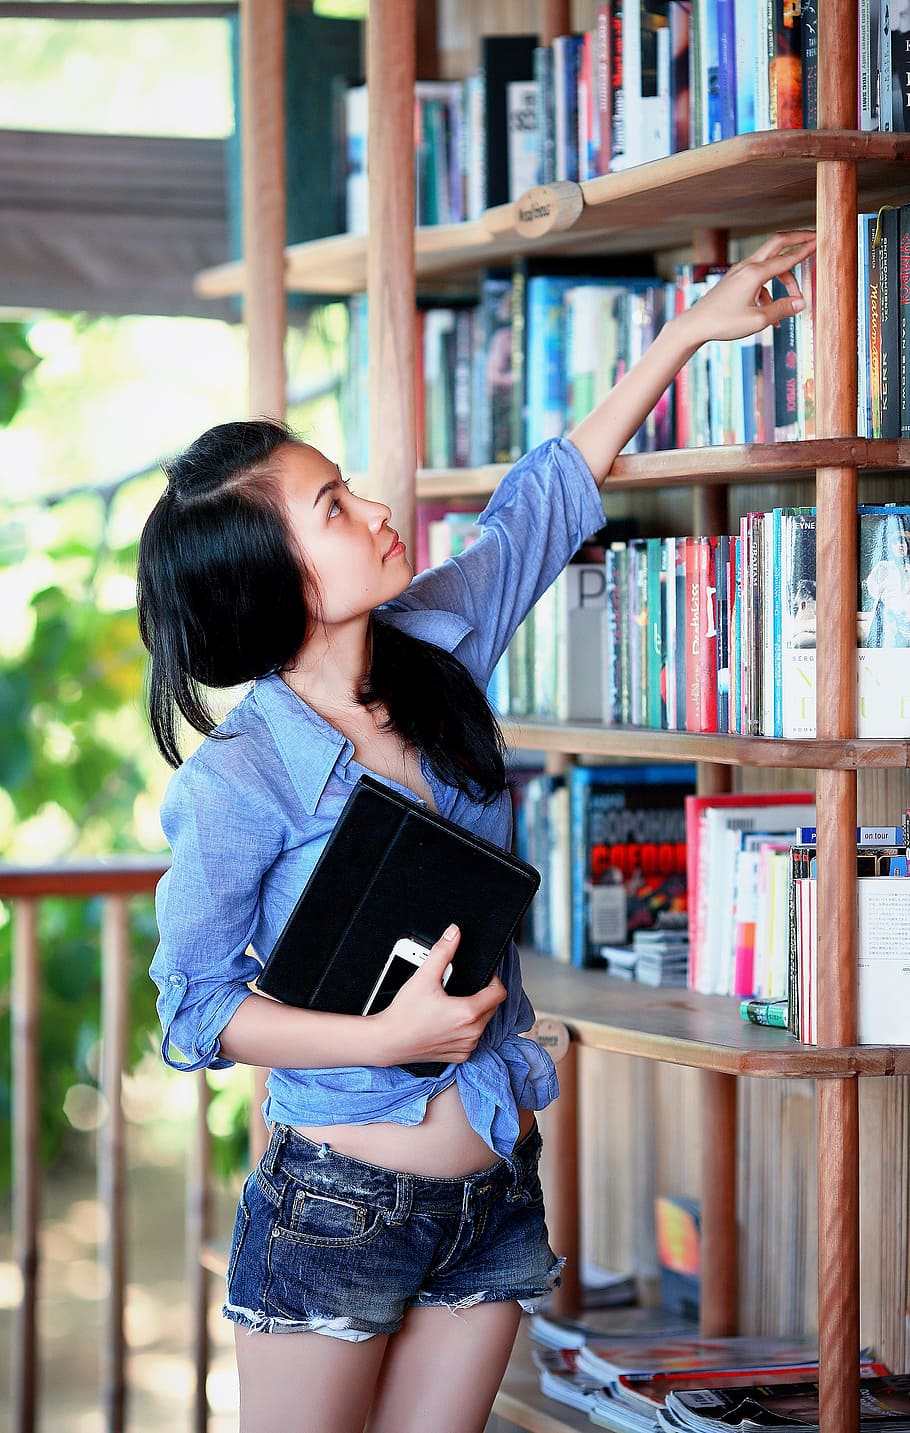 woman, blue, sport shirt, reaching, book, bookcase, girl, library, education, student